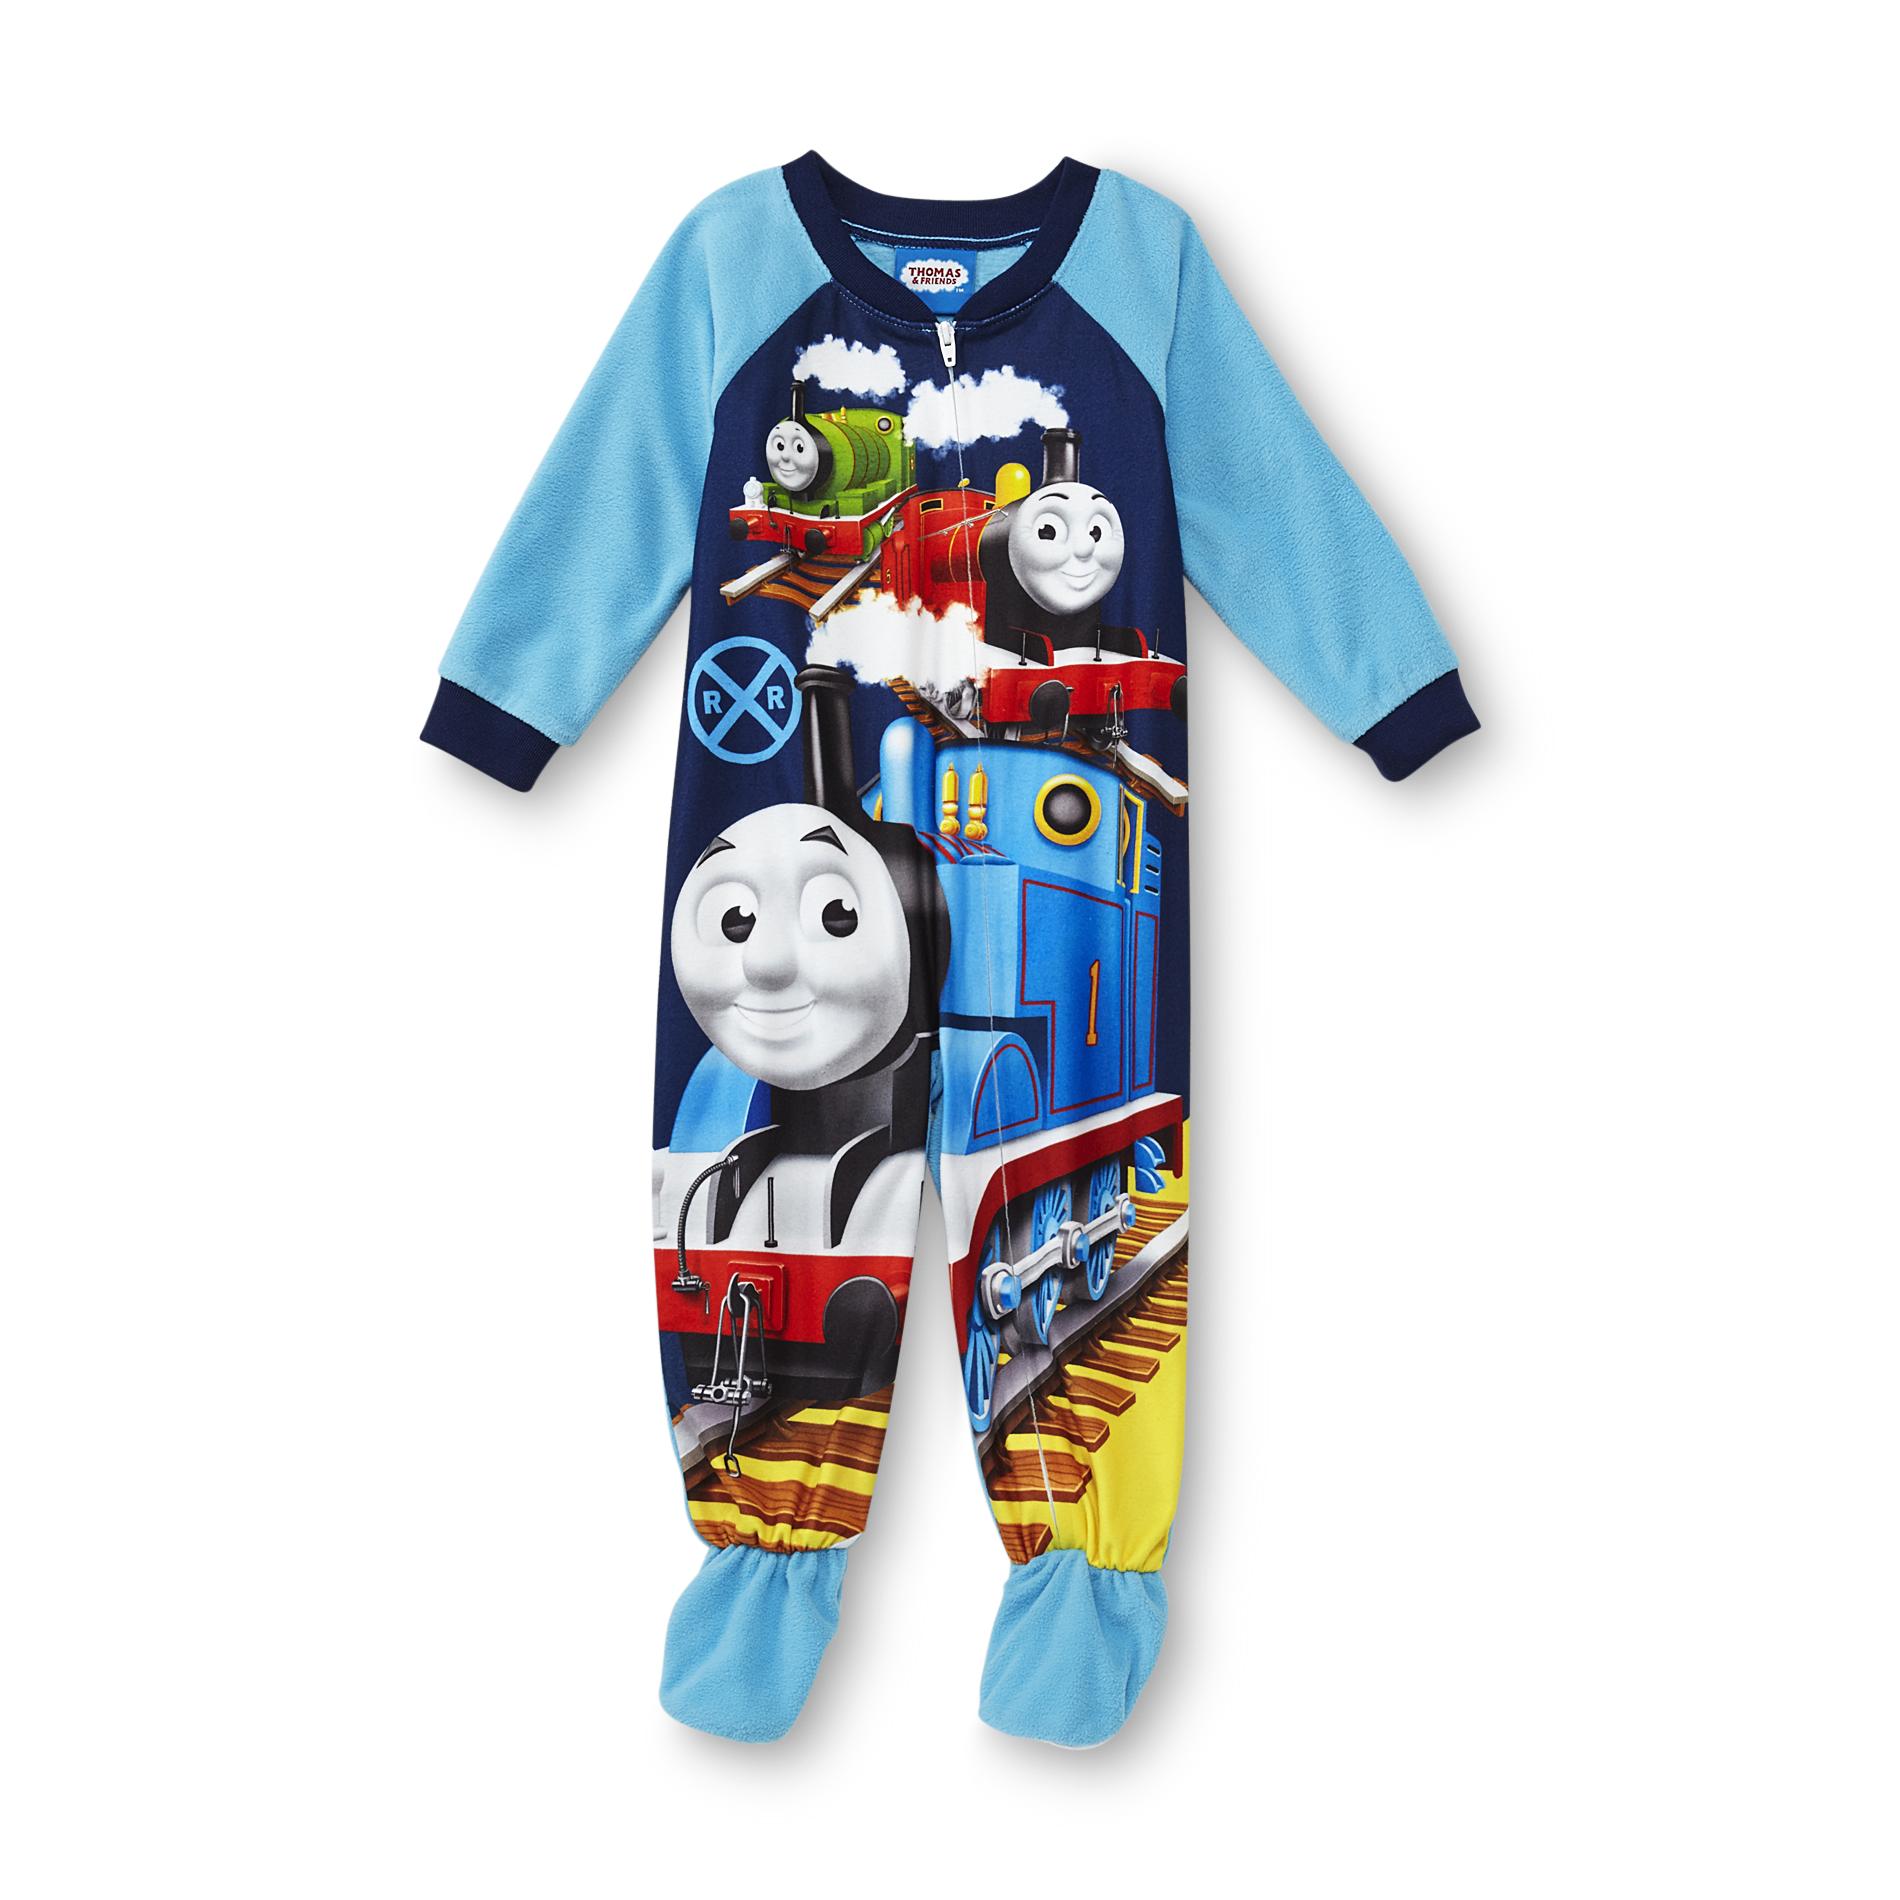 Thomas & Friends Infant & Toddler Boy's Footed Pajamas